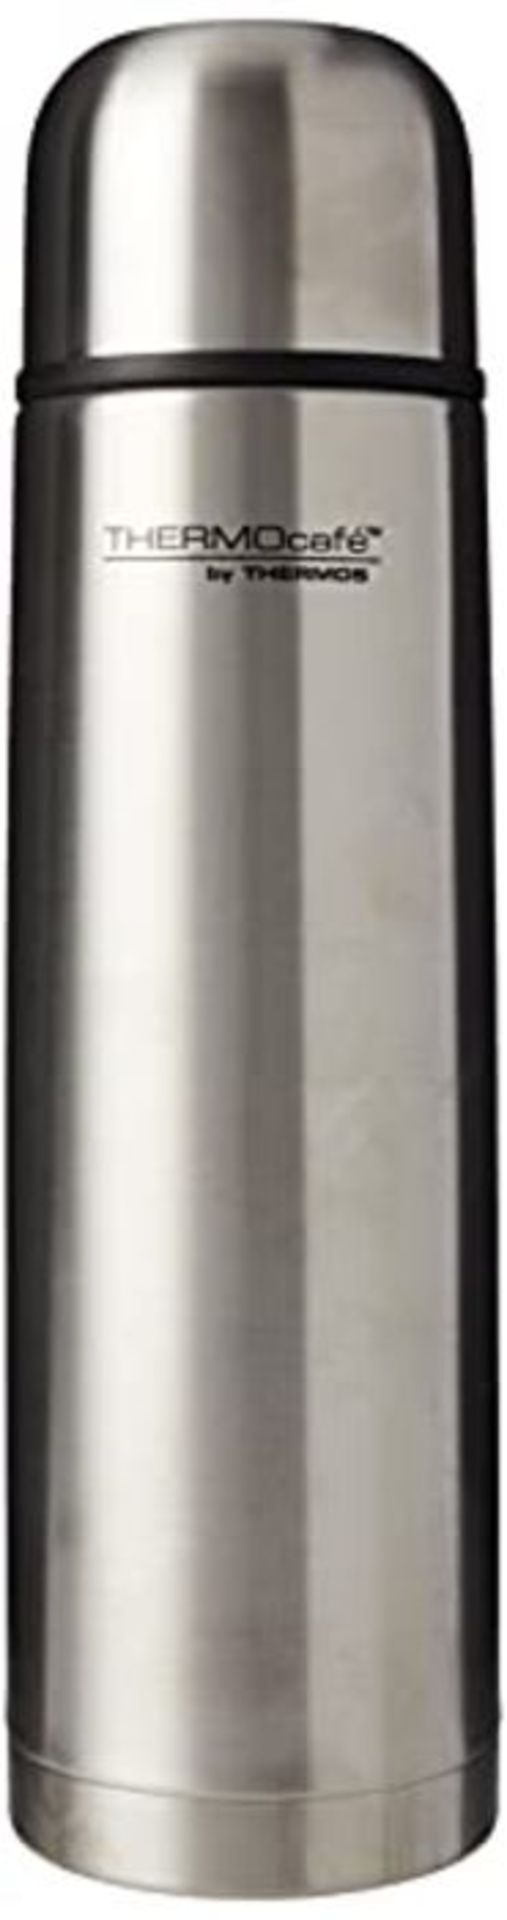 ThermoCafé Stainless Steel Flask, 1.0 L